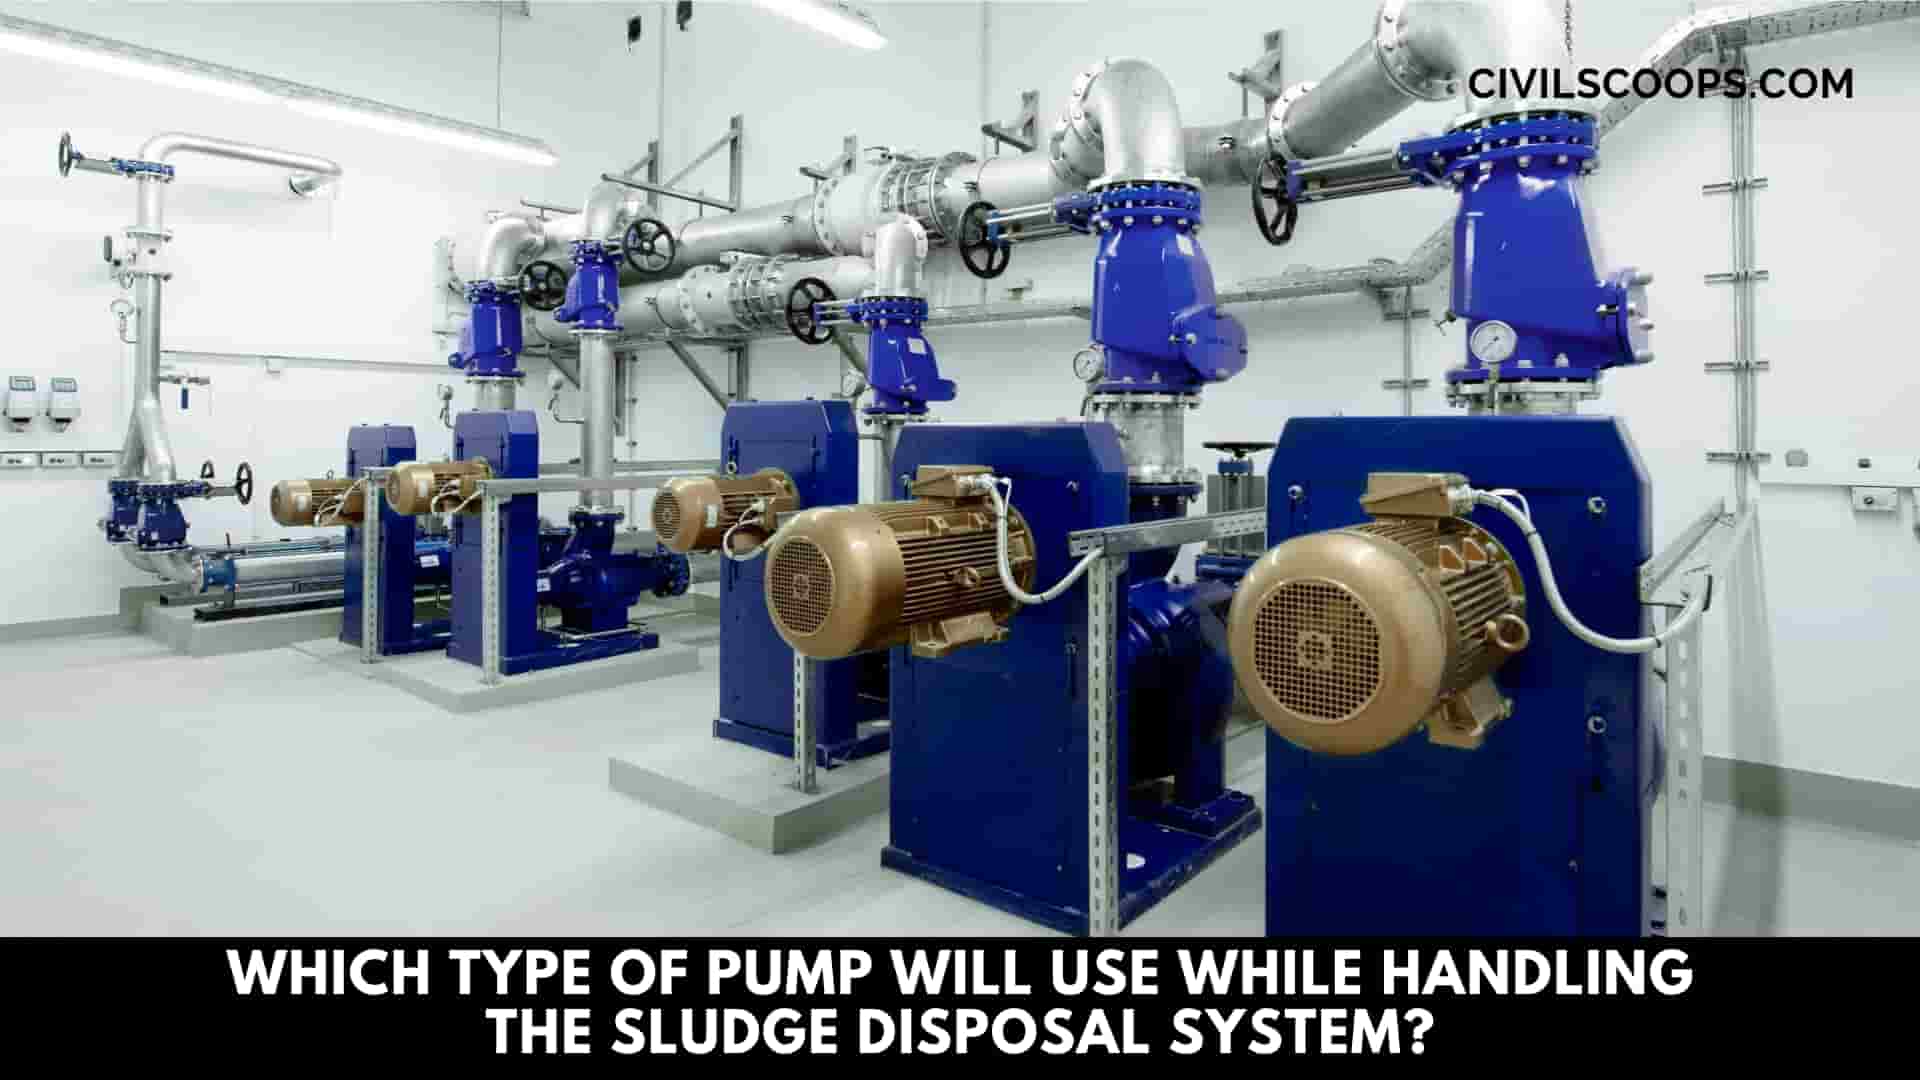 Which Type of Pump Will Use While Handling the Sludge Disposal System?